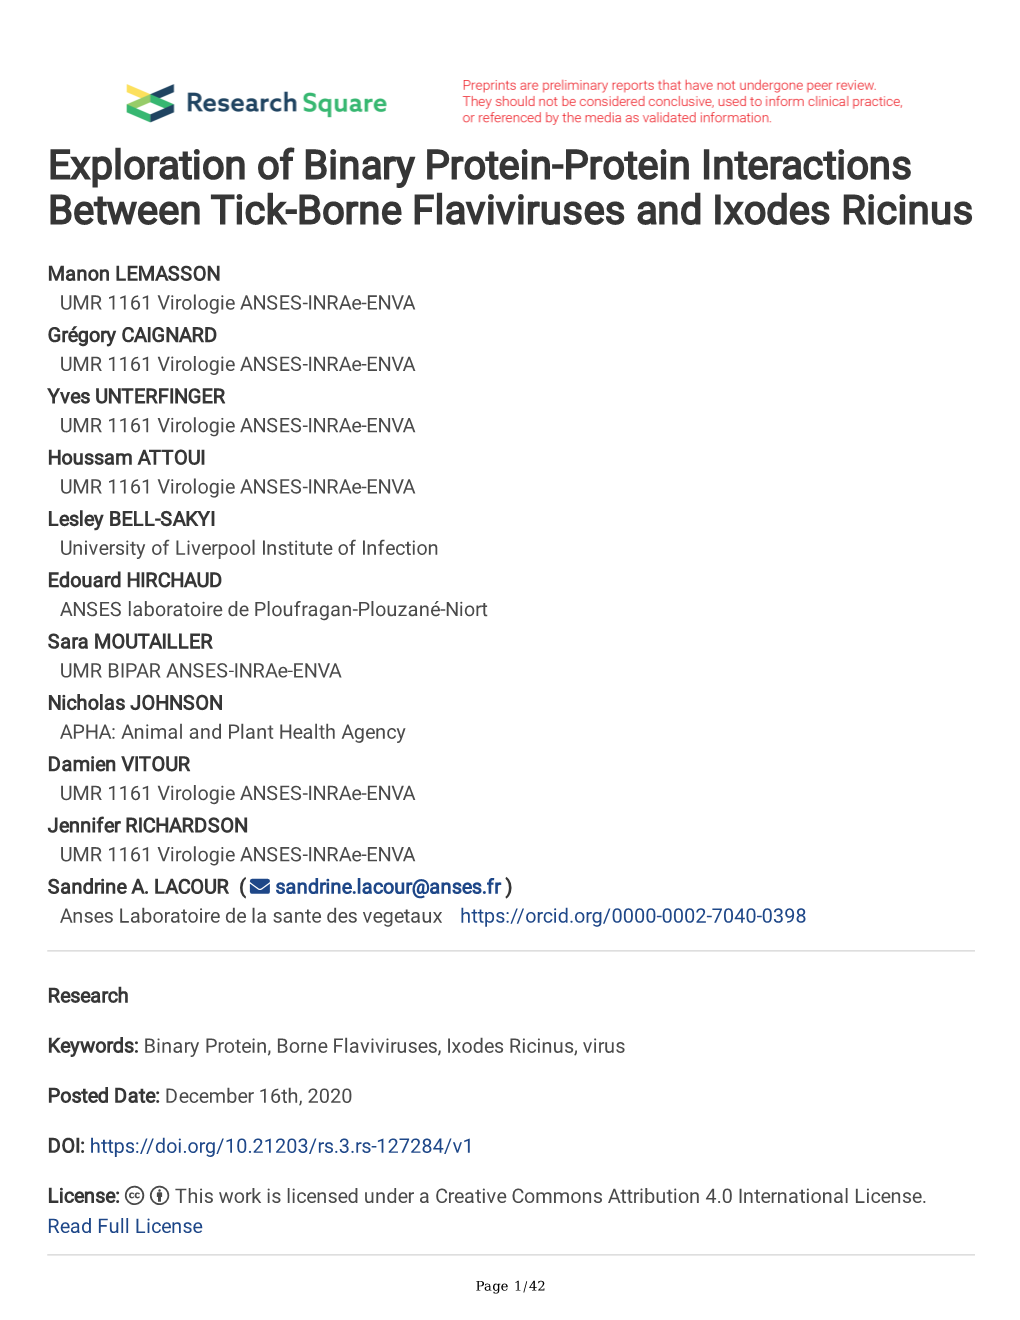 Exploration of Binary Protein-Protein Interactions Between Tick-Borne Flaviviruses and Ixodes Ricinus